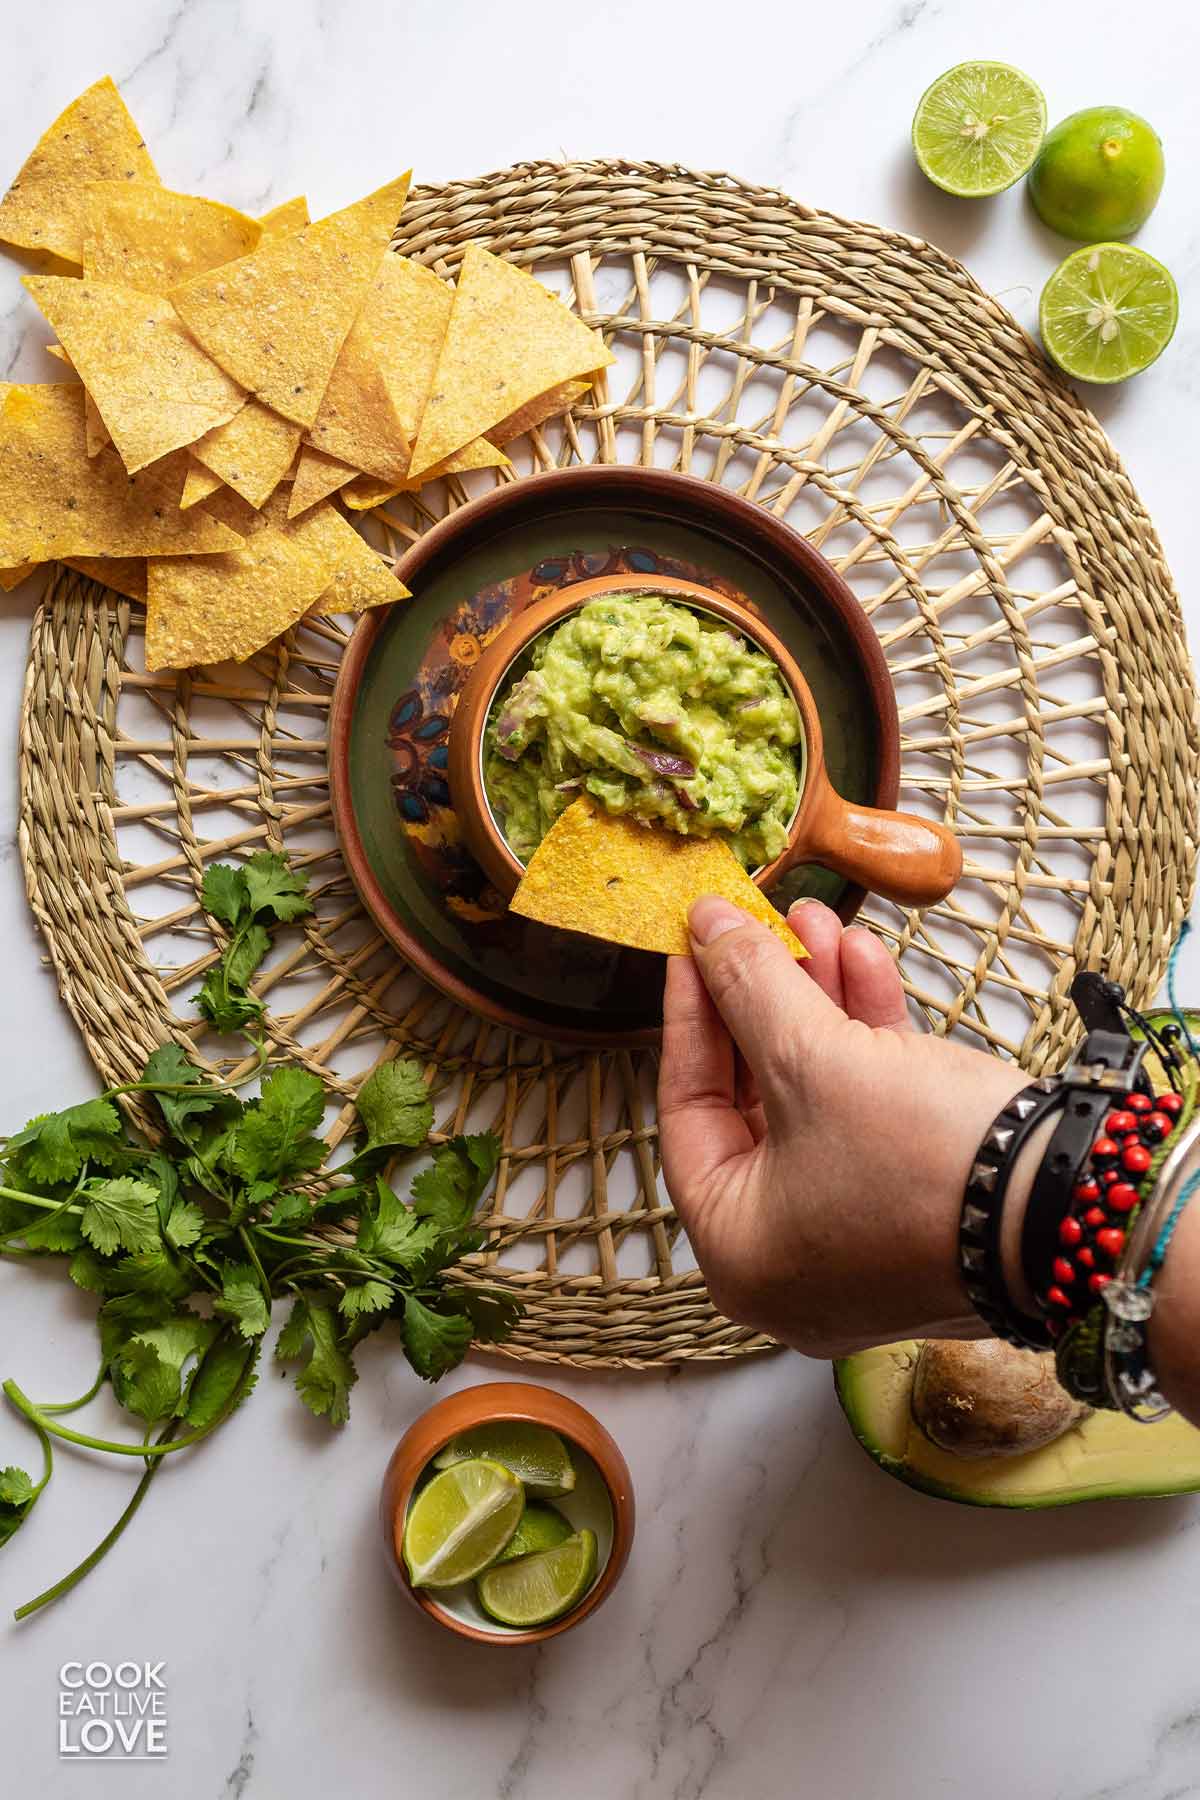 Hand dipping a chip into a bowl of guacamole.